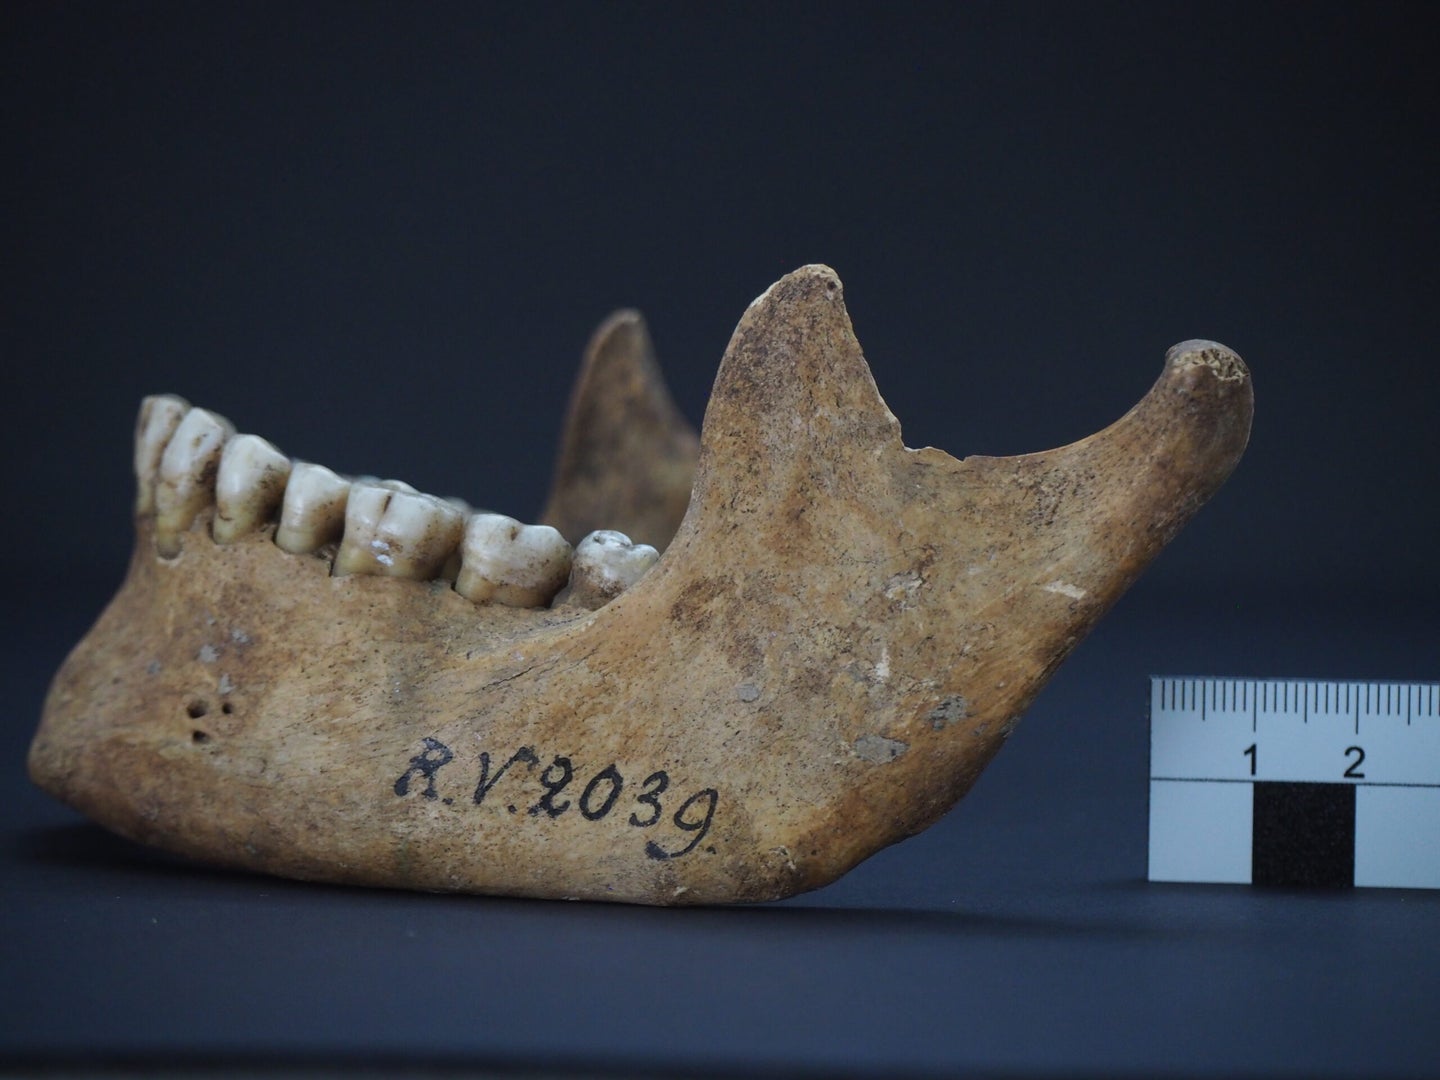 A highly weathered human jaw bone, labeled RV 2039.